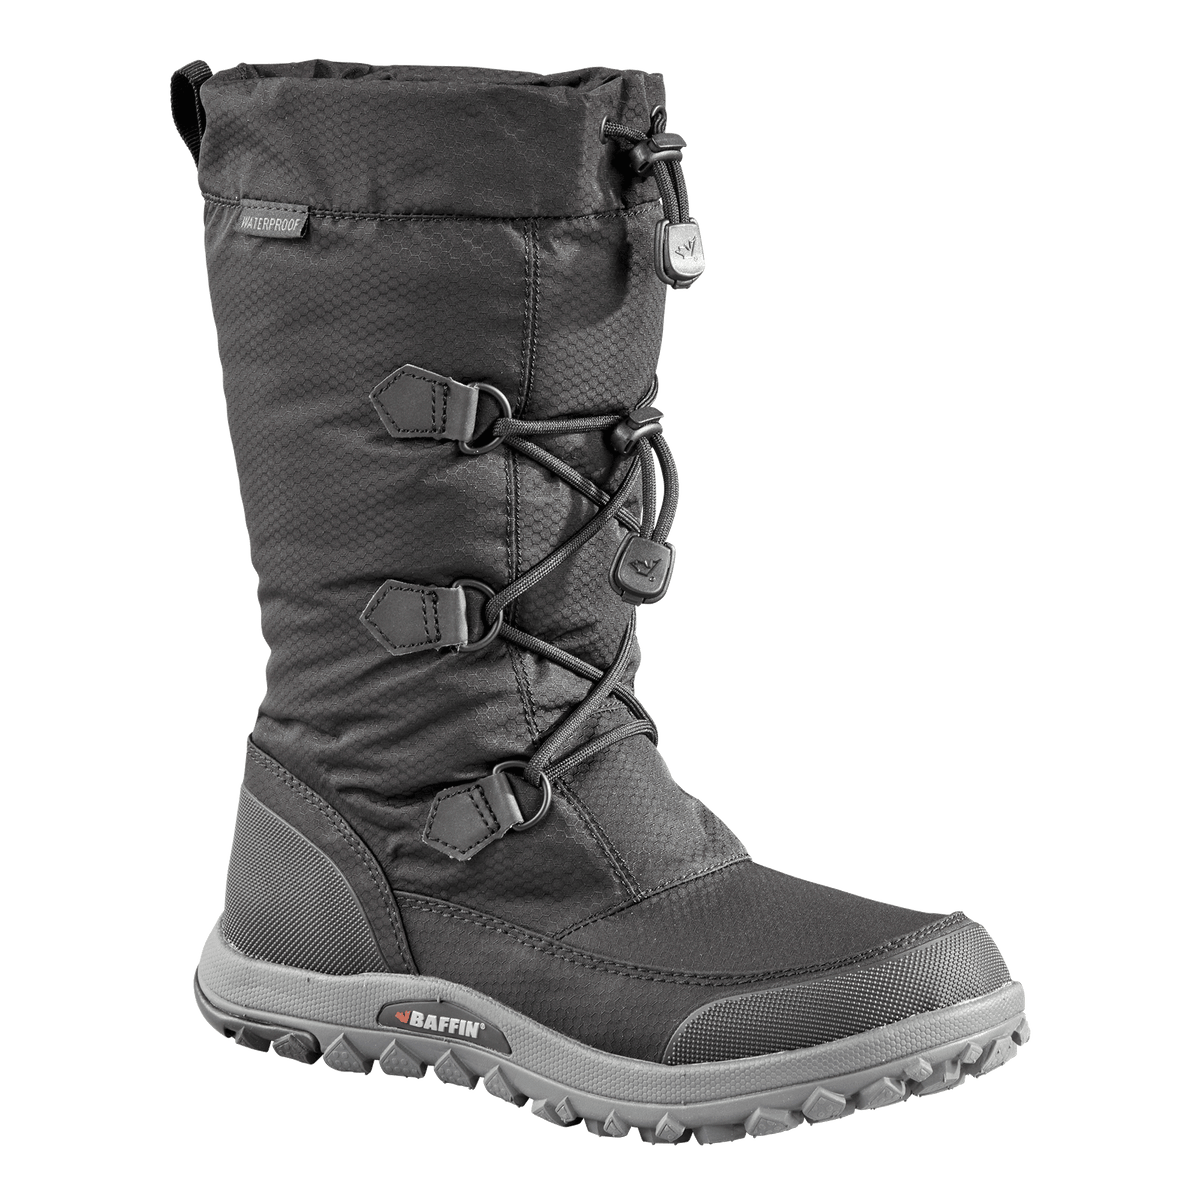 LIGHT | Women's Boot – Baffin - Born in the North '79